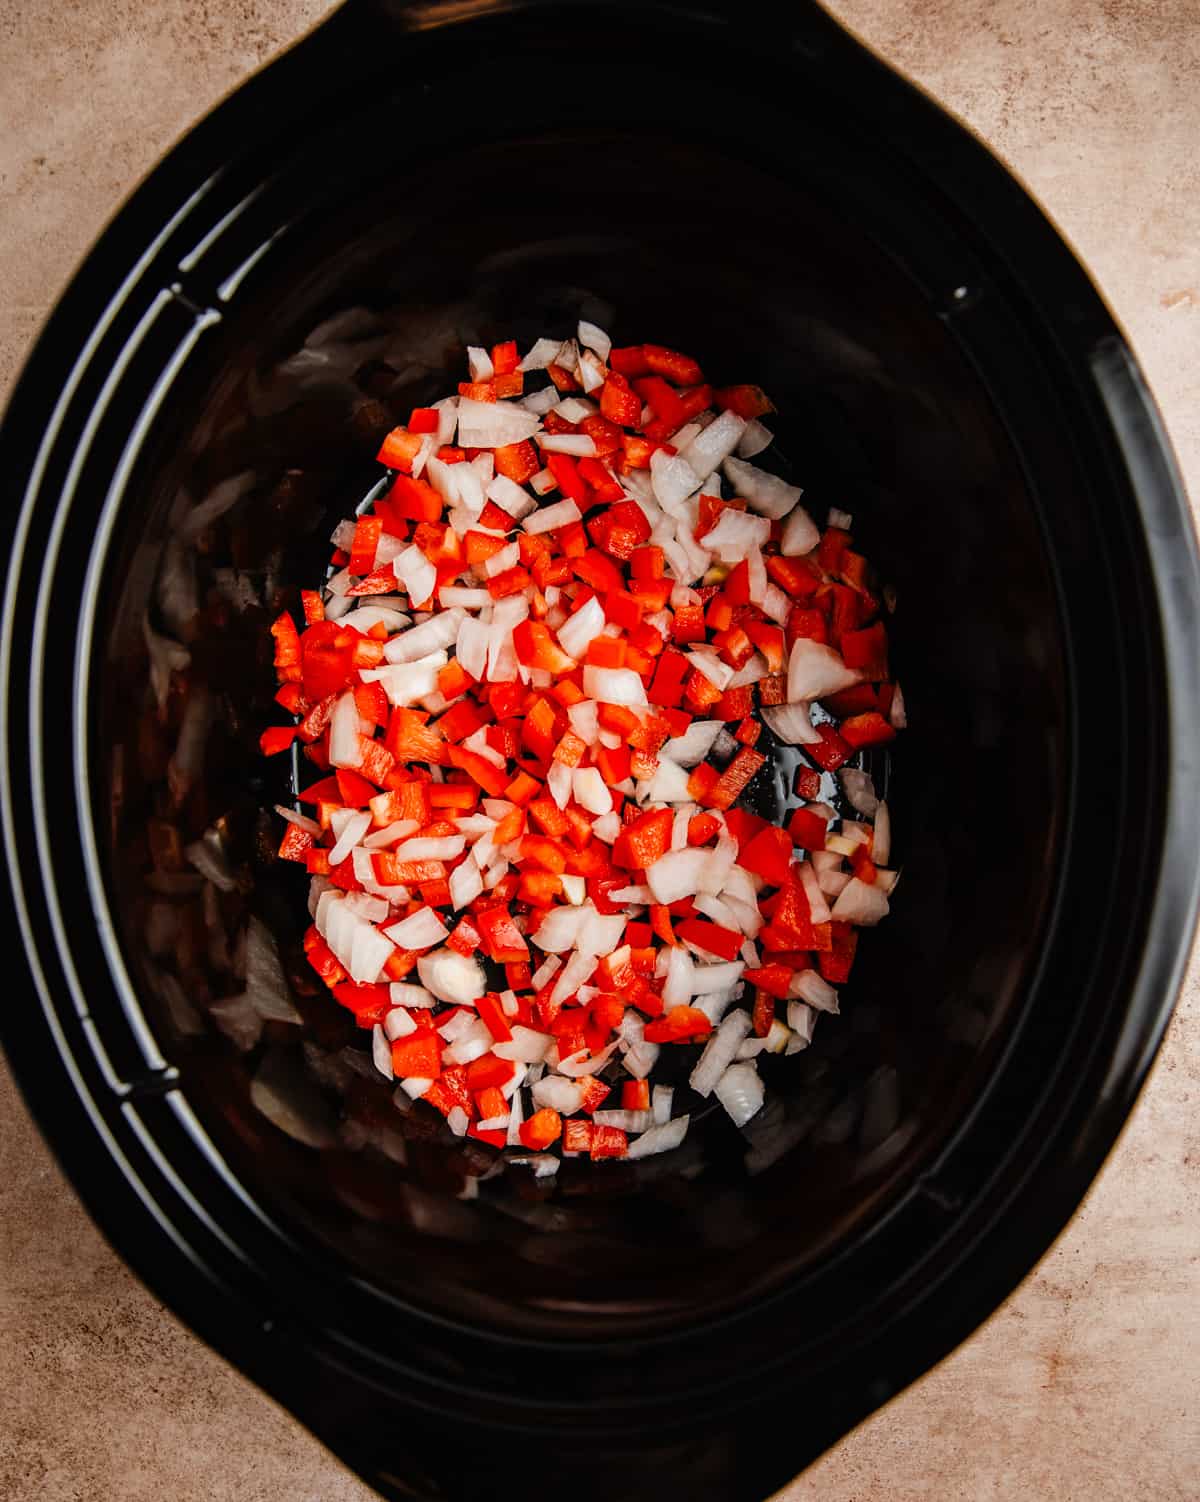 Red pepper and onion chopped at the bottom of crockpot.